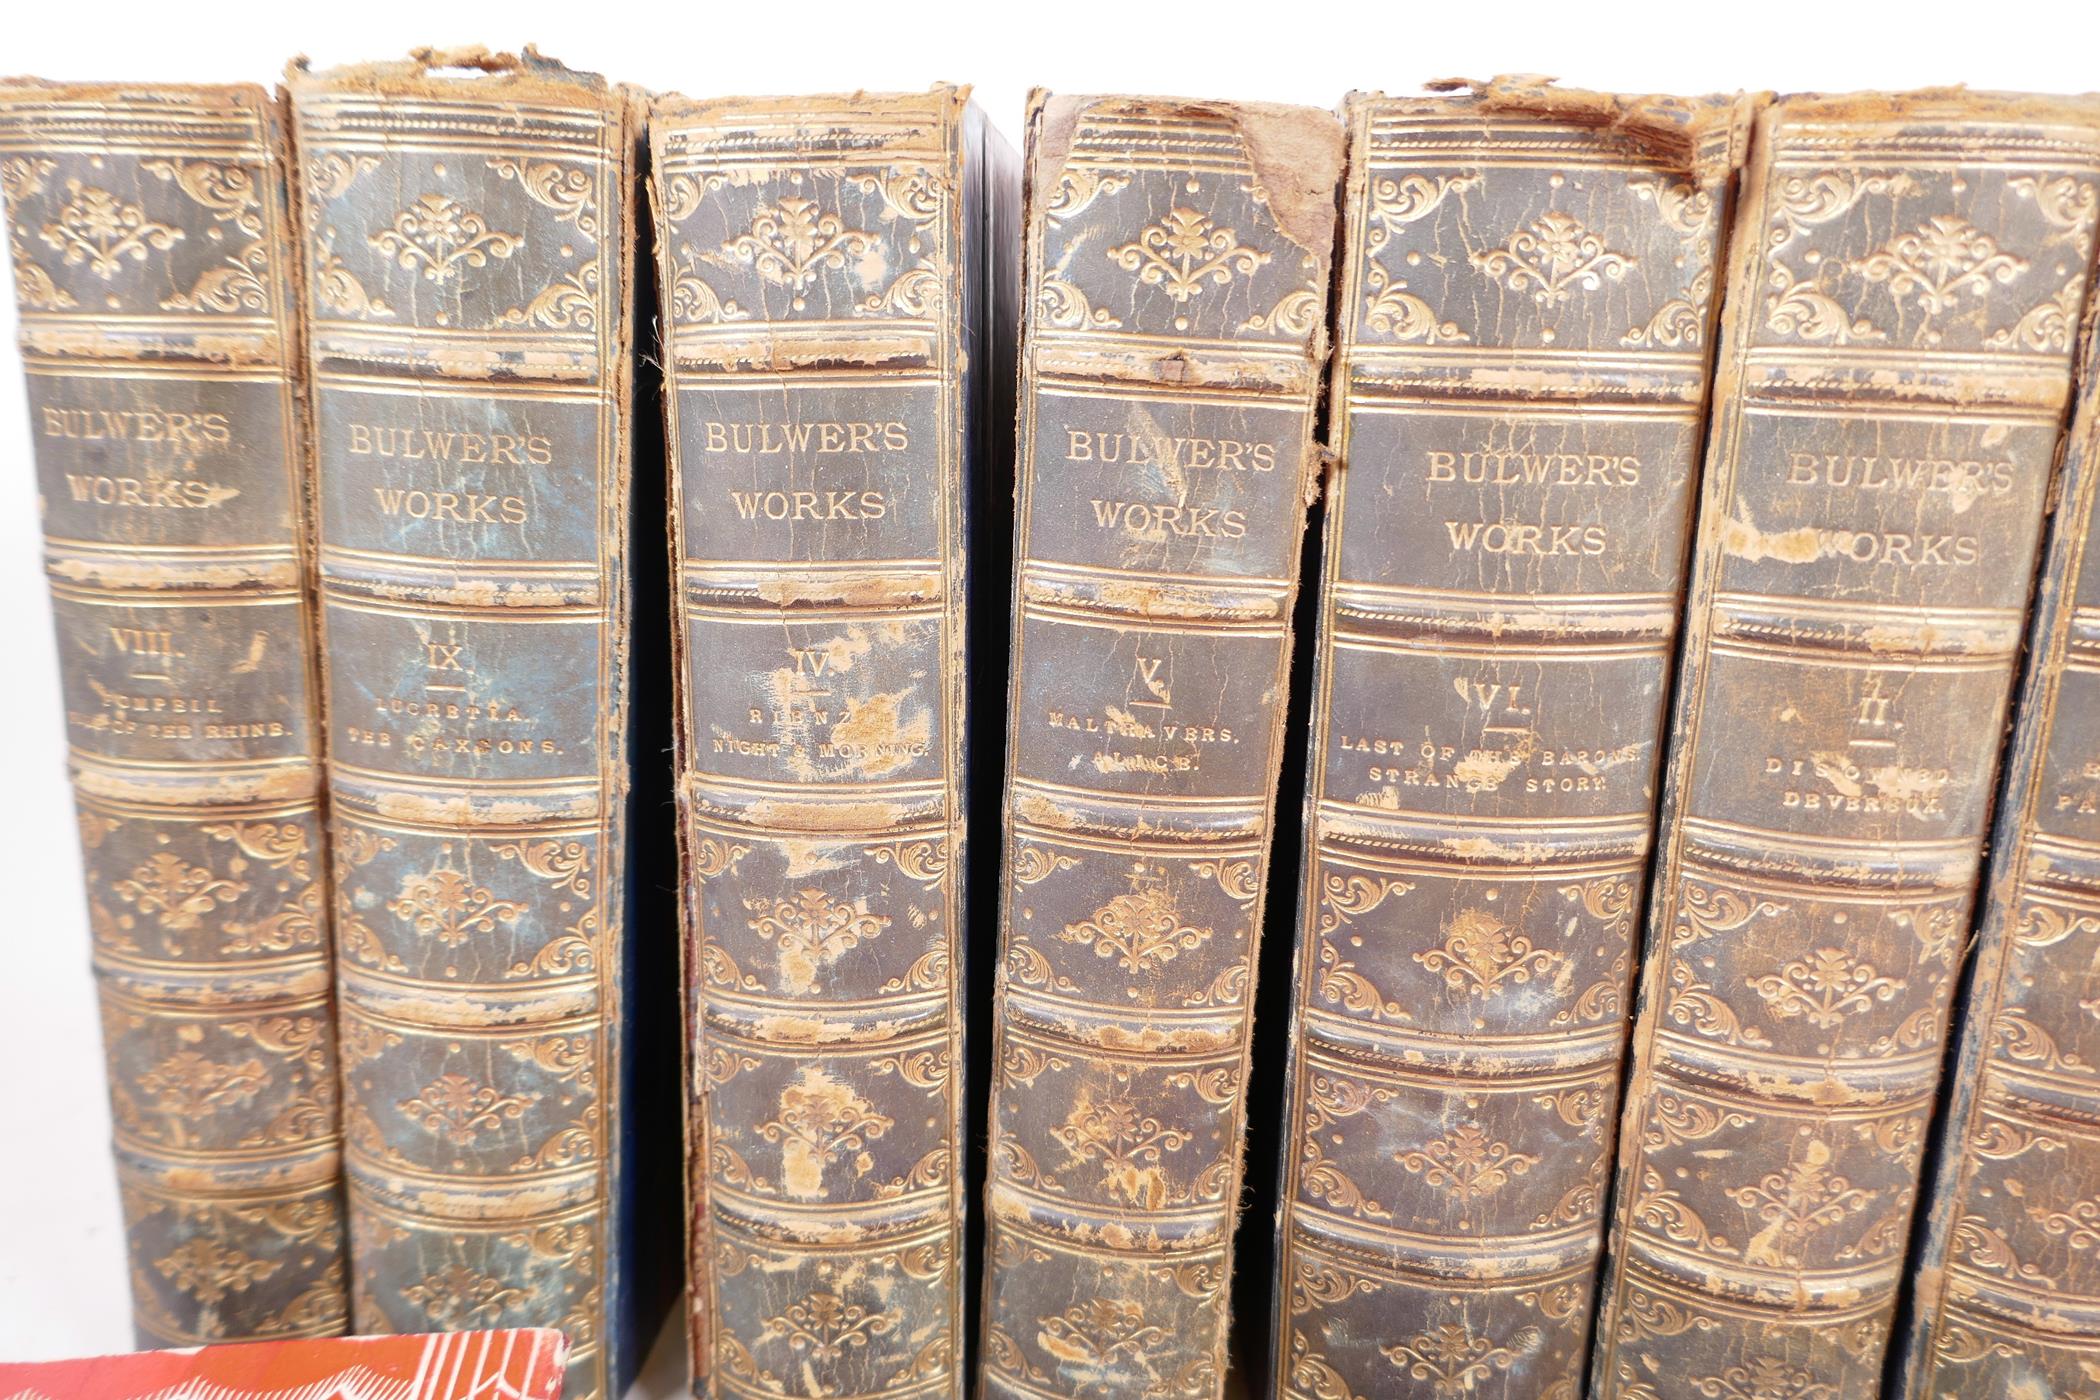 Bulwer's works, Novels and Romances of the Right Hon. Lord Lytton, George Routledge and Sons, compl - Image 4 of 5